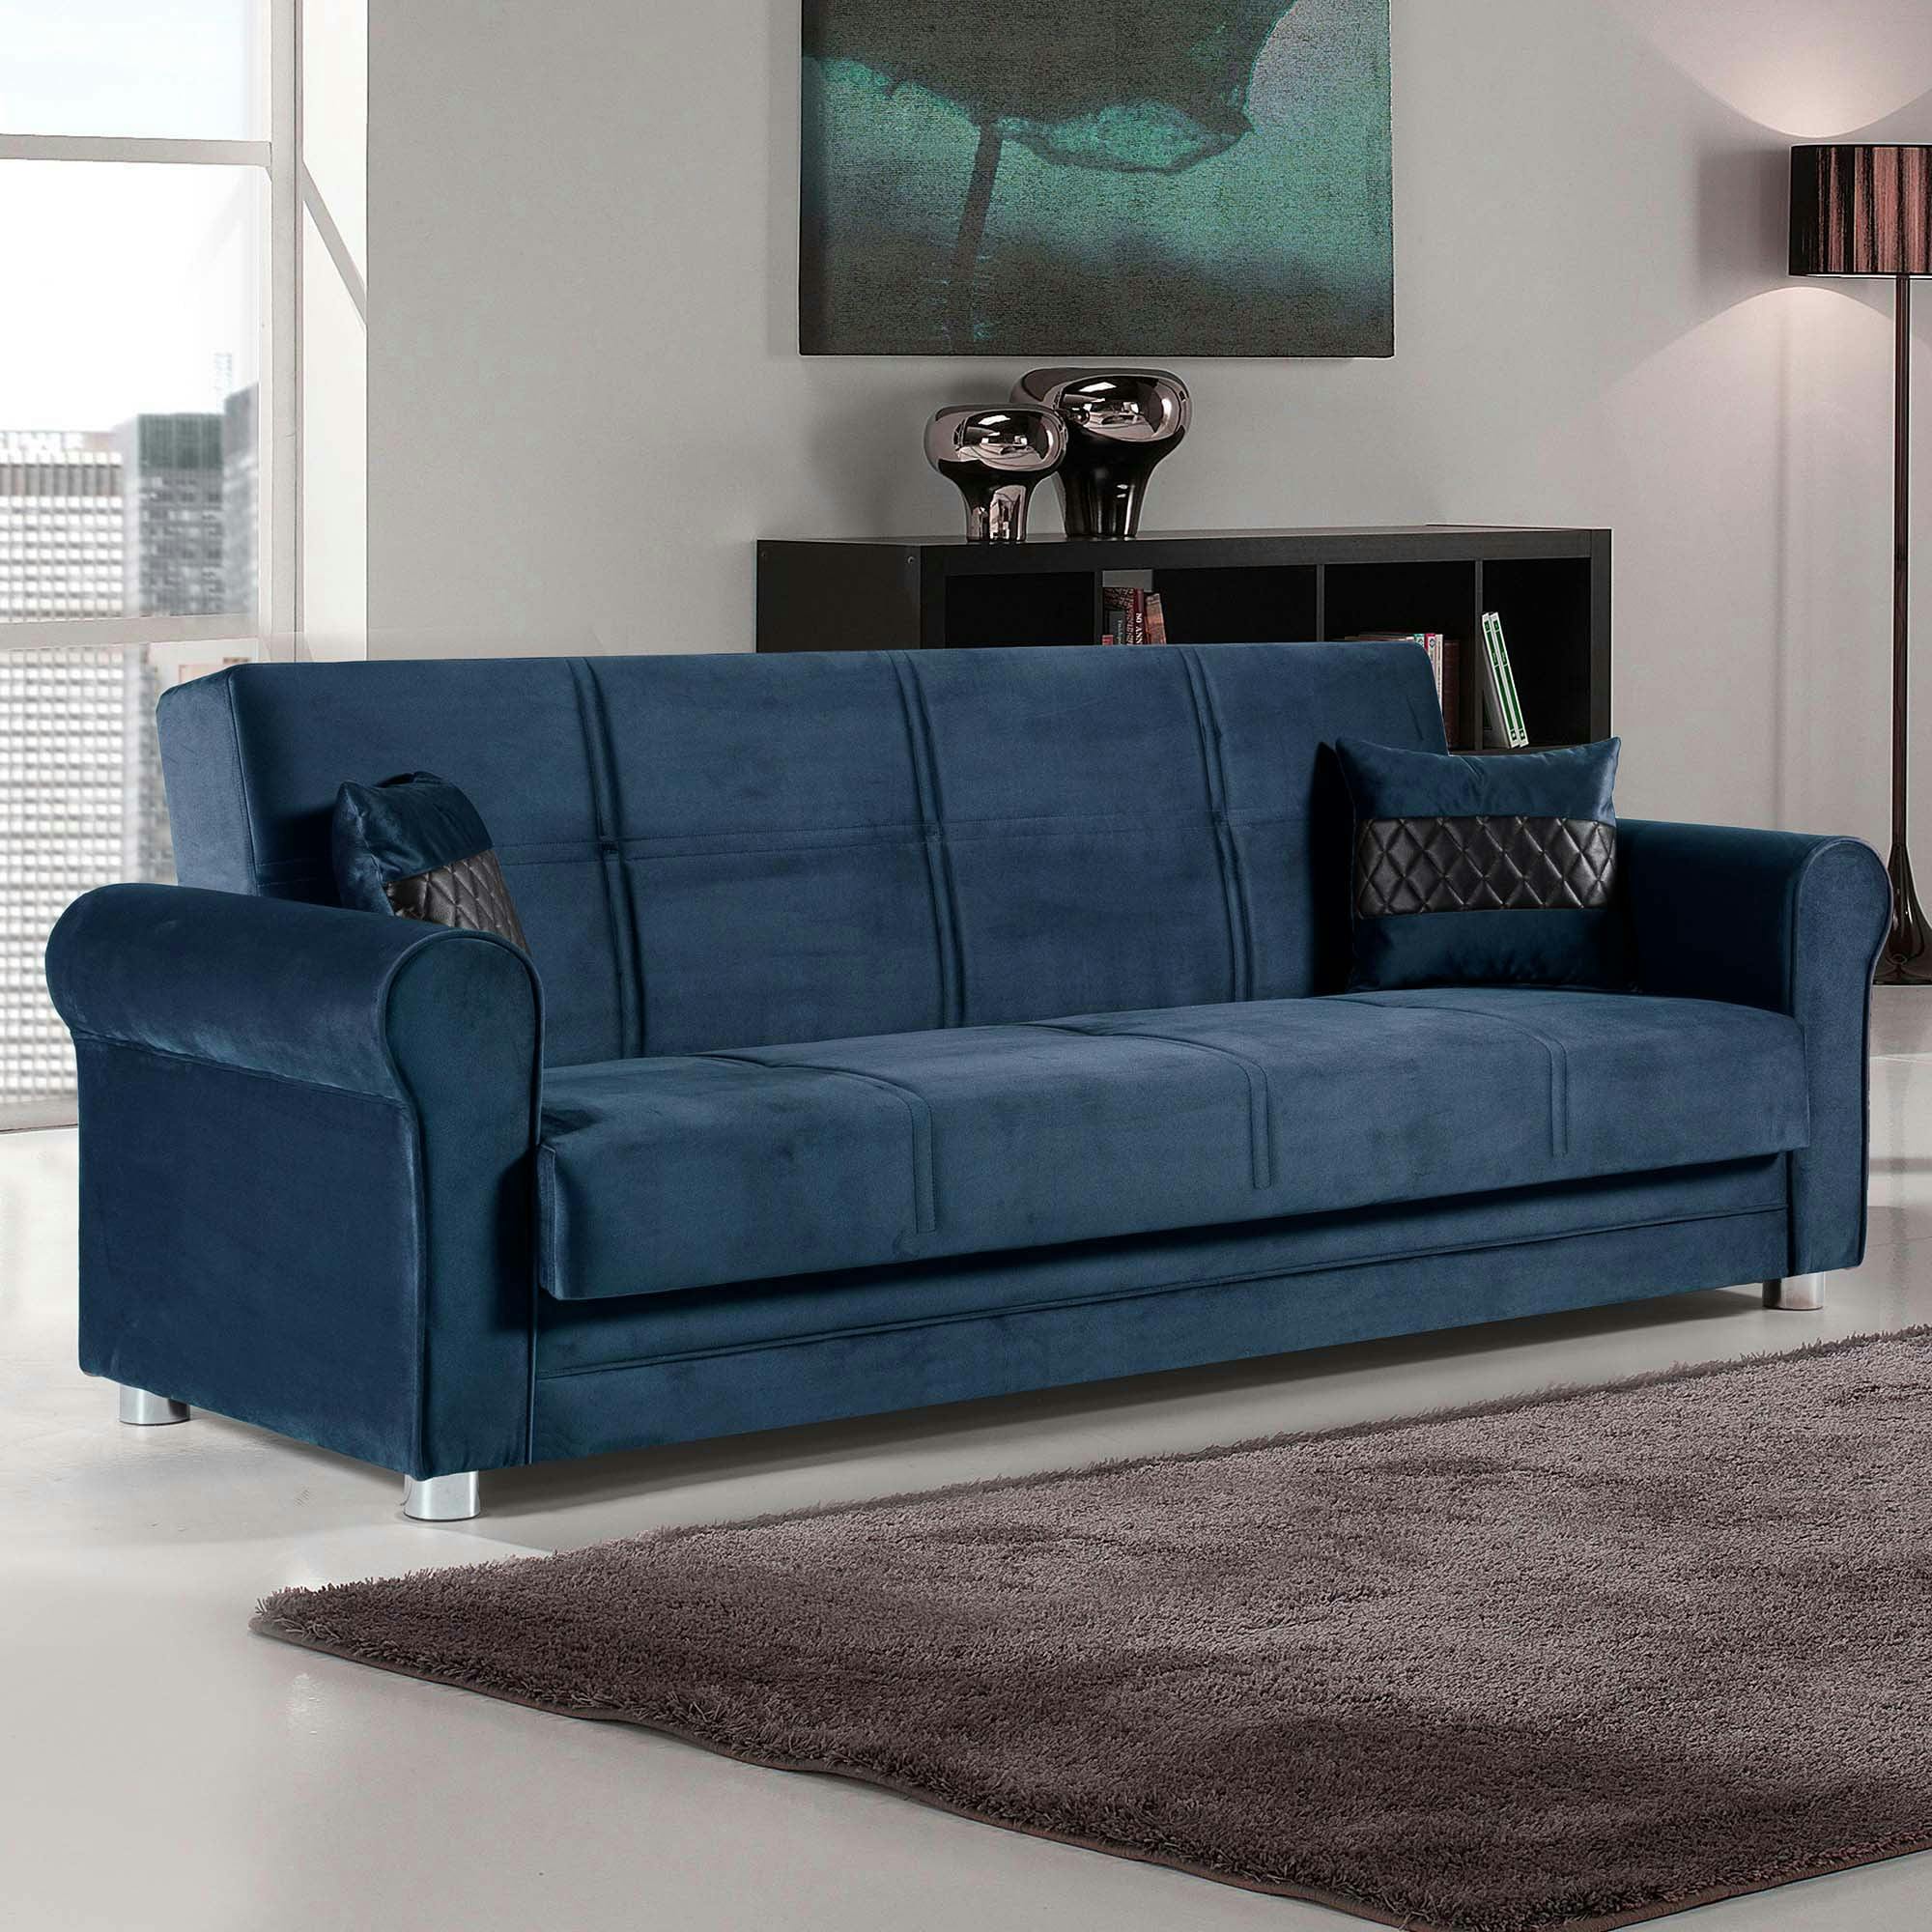 Twin Blue Microfiber Convertible Sofa Bed with Storage